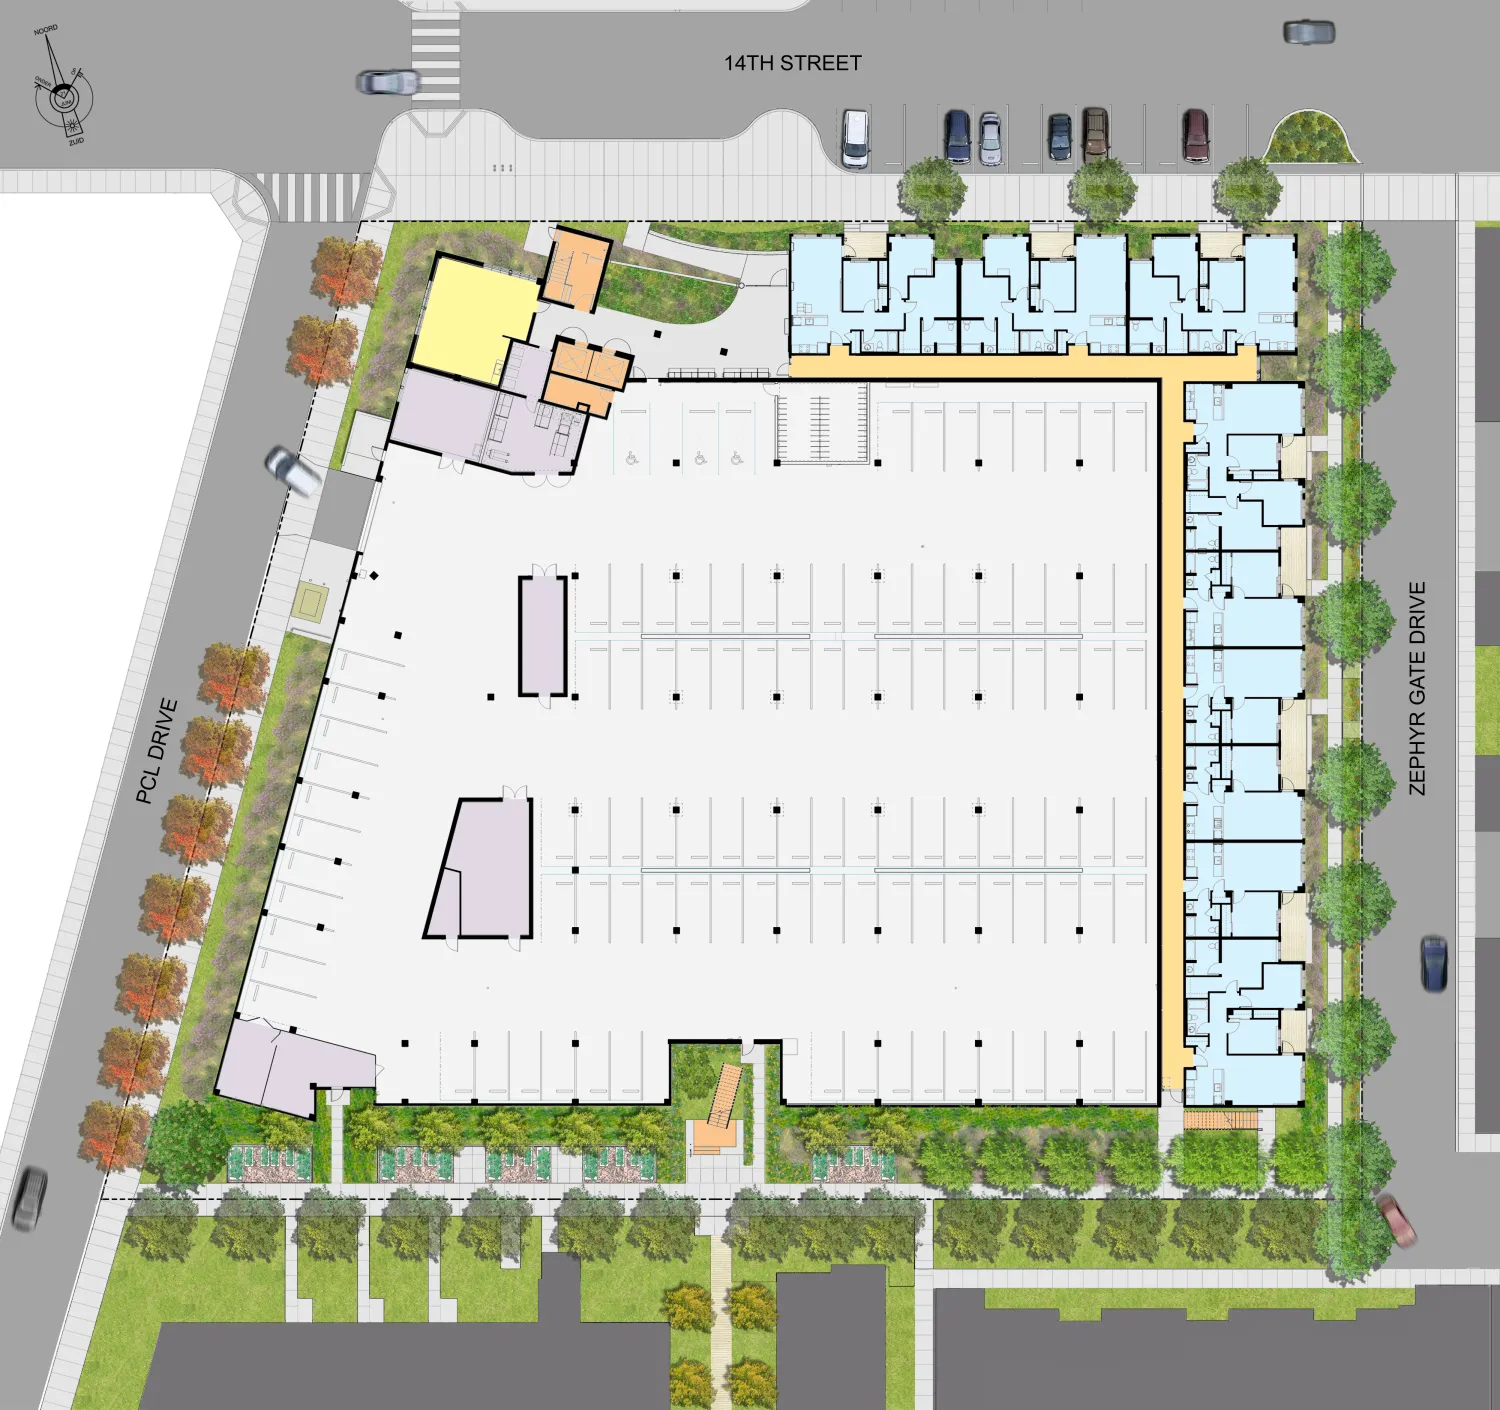 Ground floor site plan for Ironhorse at Central Station in Oakland, California.